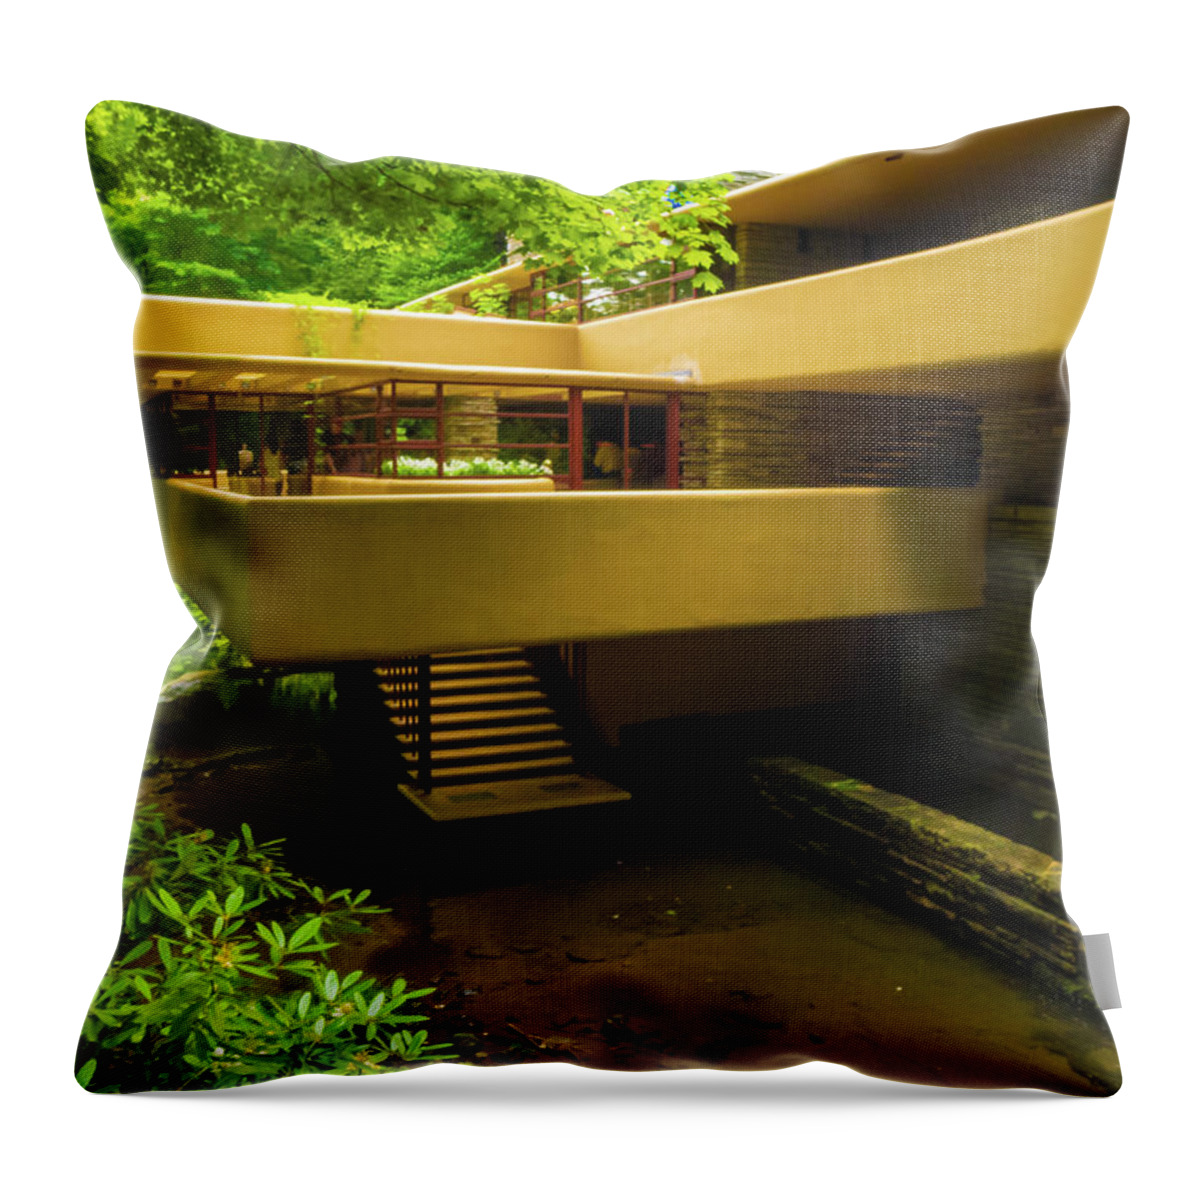 2-events/trips Throw Pillow featuring the photograph Outside Falling Waters by Louis Dallara